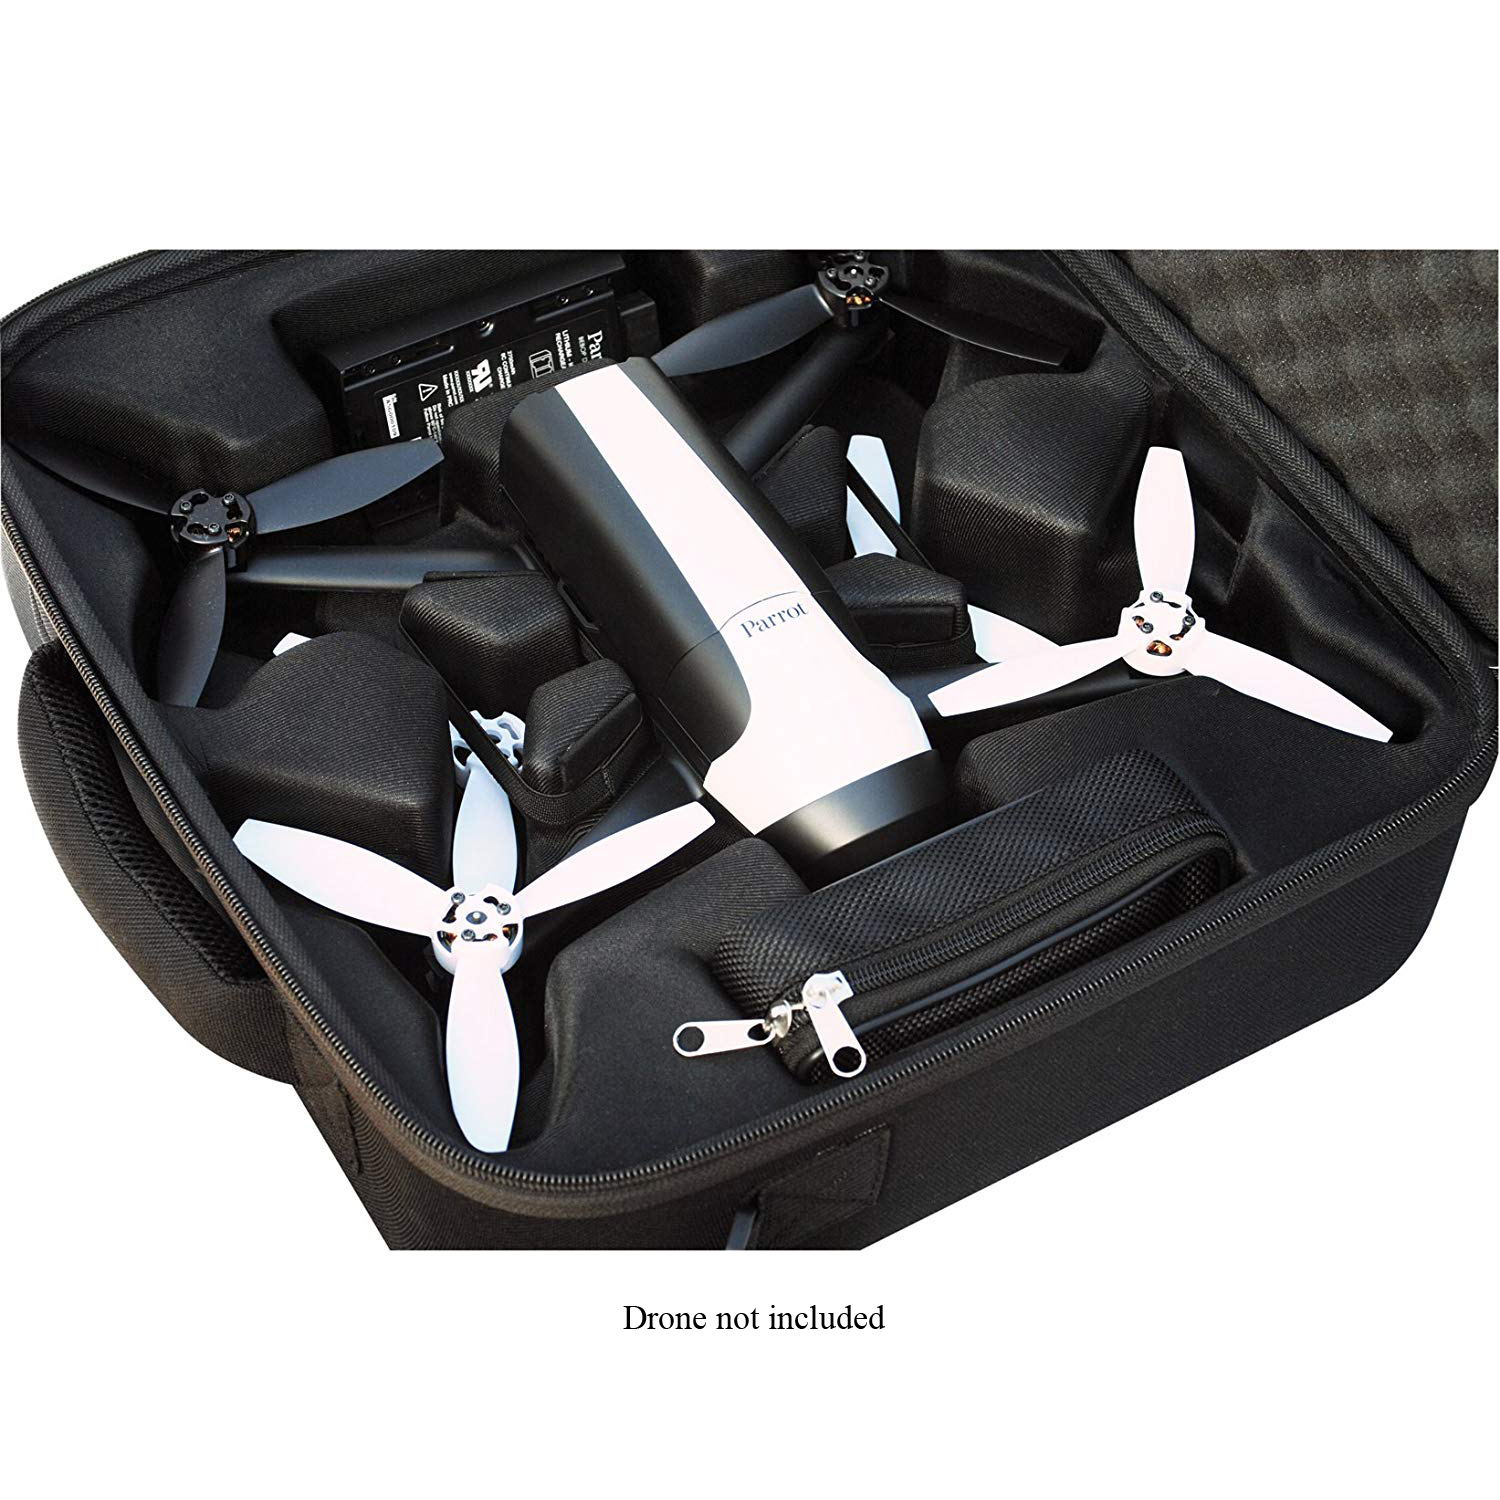 Photos - Drone Parrot Hard Side Case for Bebop 2 Quadcopter  - PF070232AA PF070232AA 